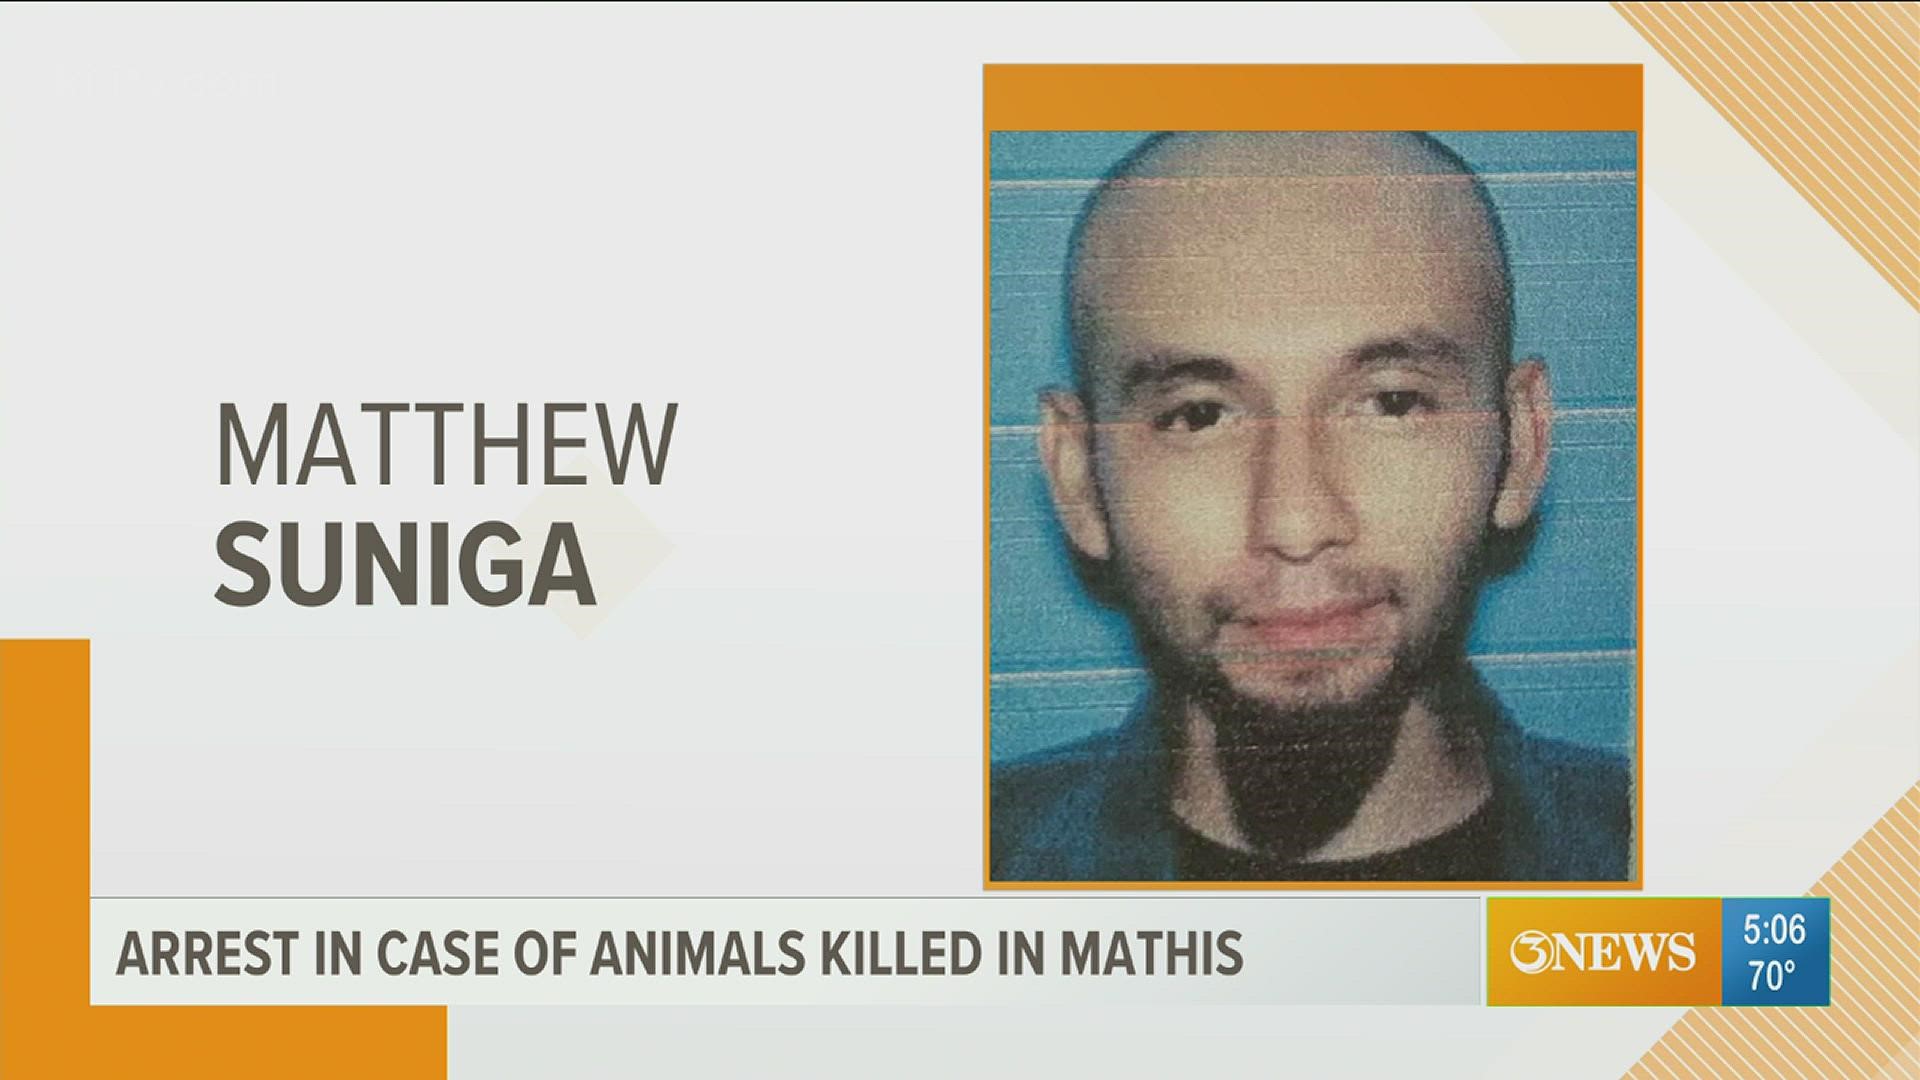 Matthew Suniga, 30, confessed to killing the animals, Chief Scott Roush with Mathis Police Department told 3News.